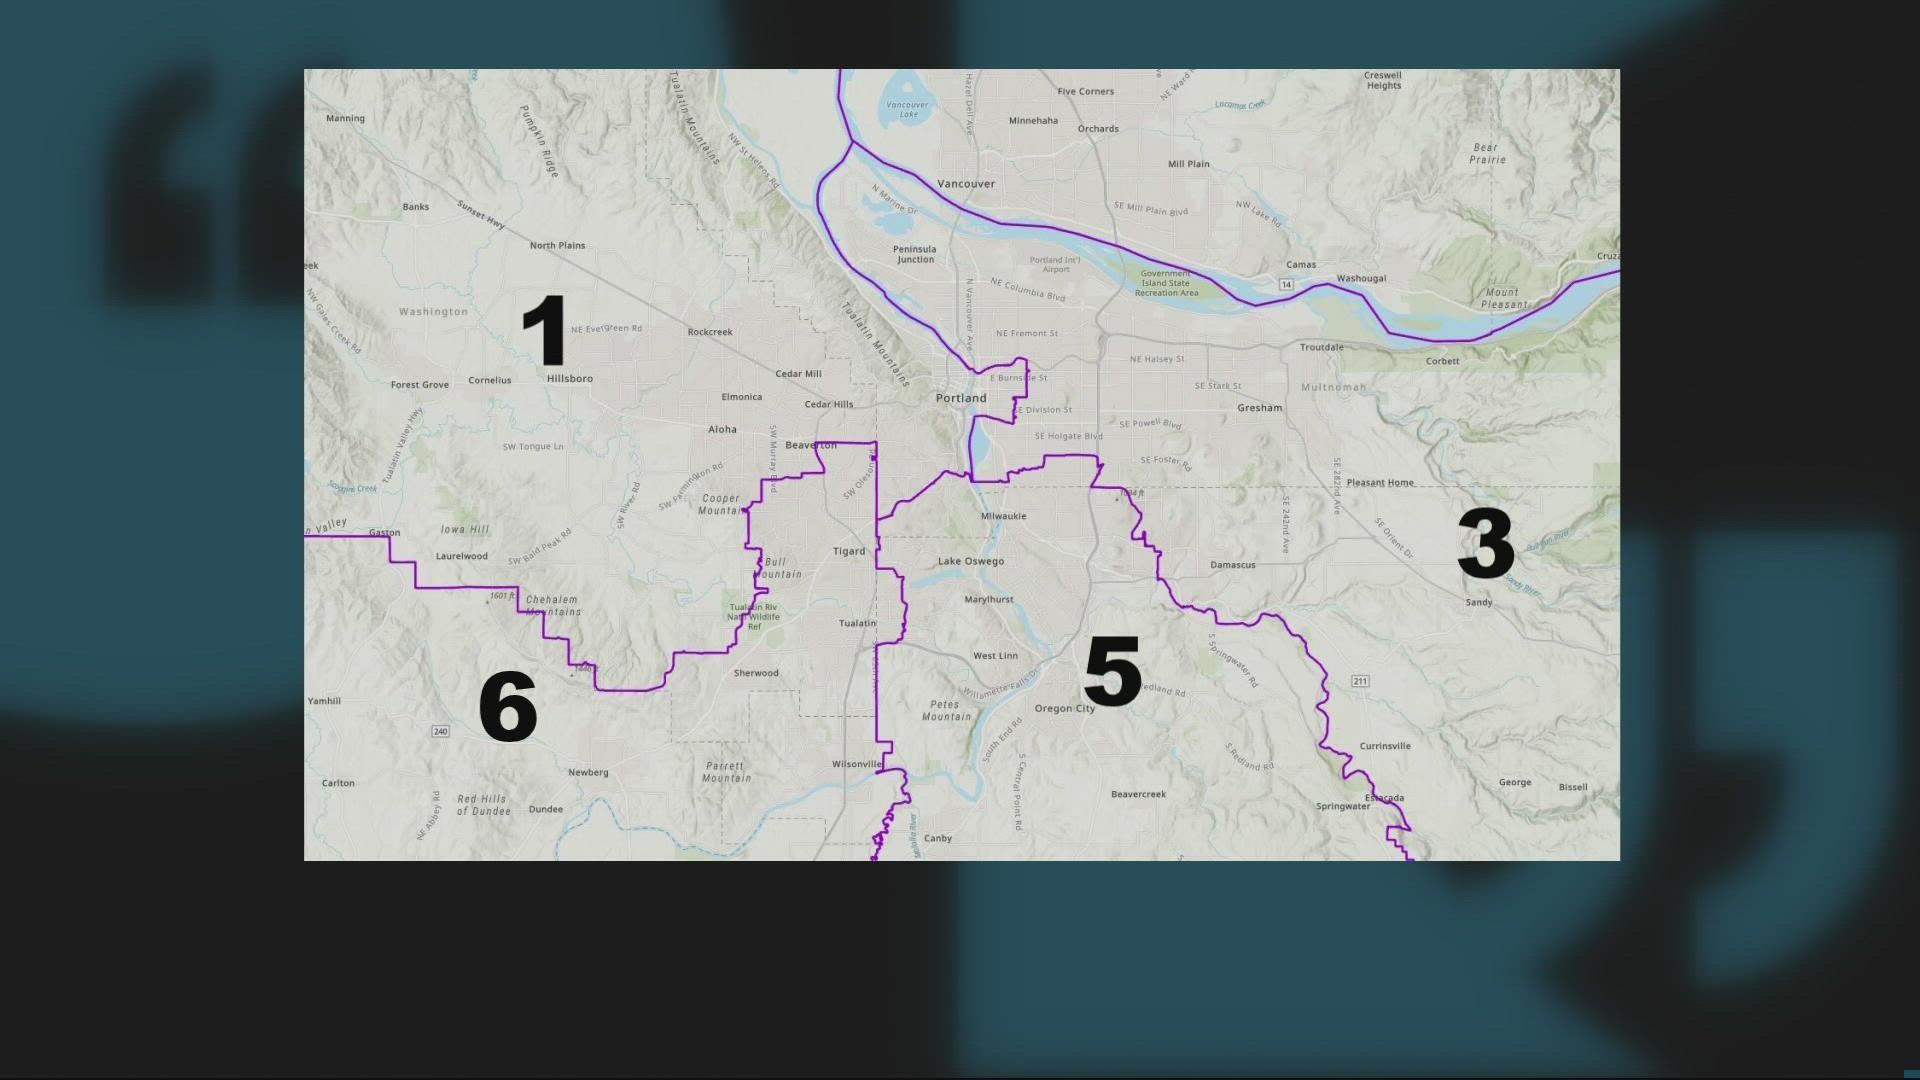 With the new redistricting plans in Oregon, some people may have a new representative.